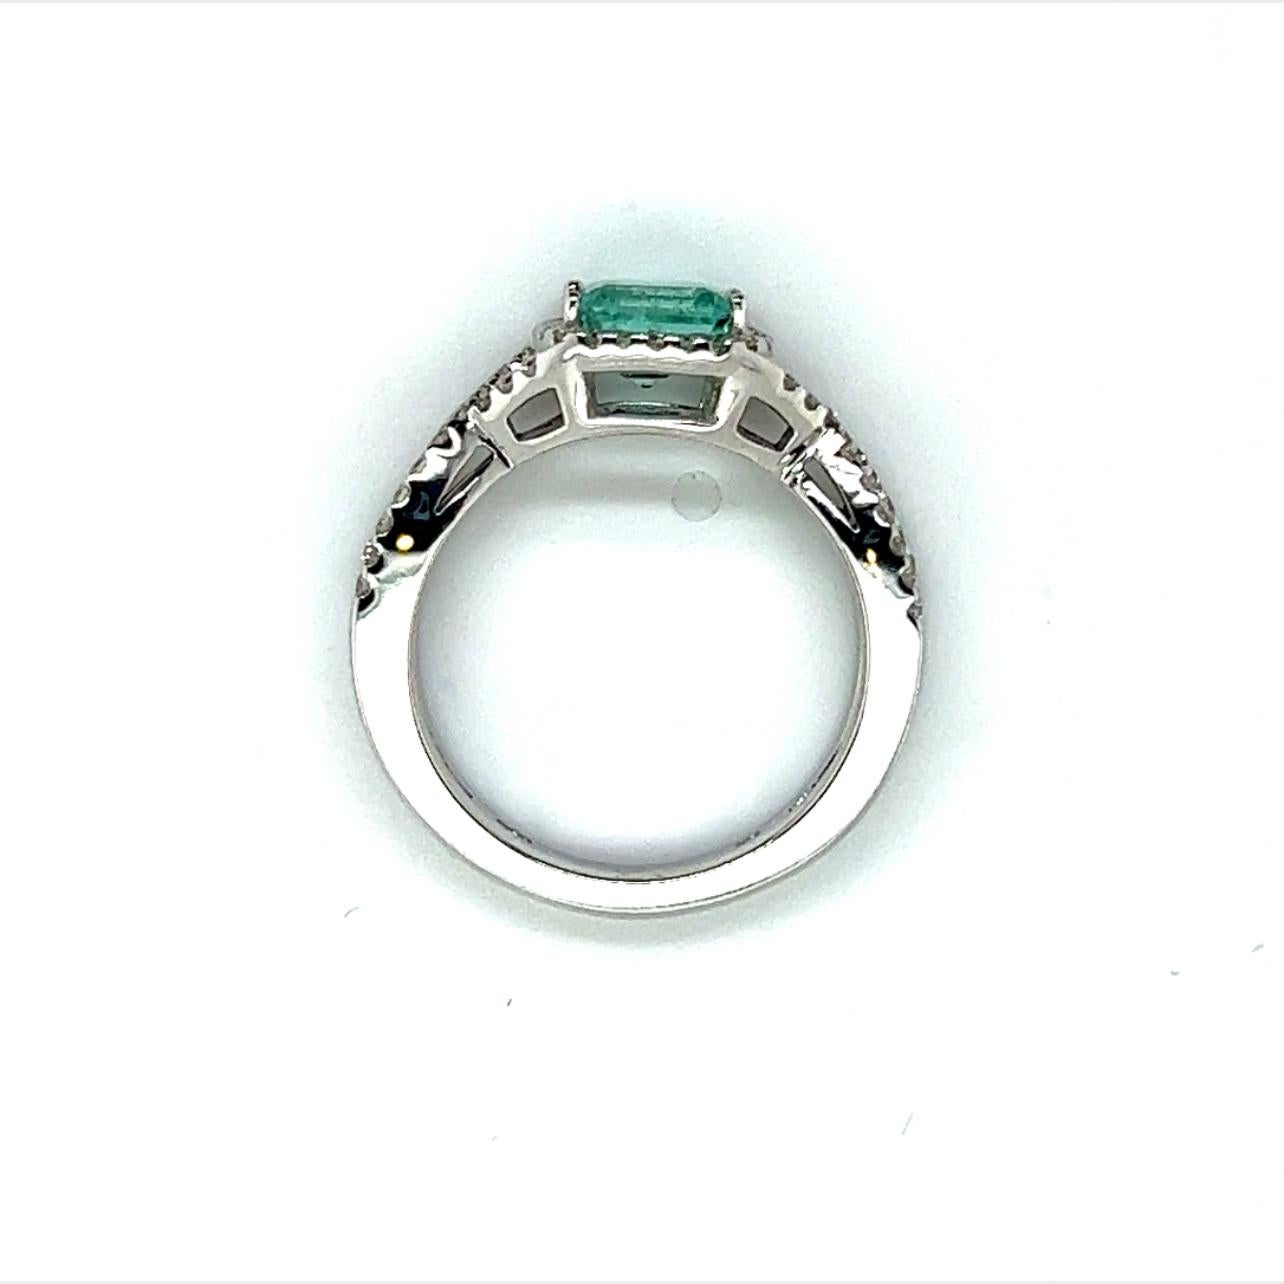 Emerald Cut Natural Emerald Diamond Ring 6.5 14k W Gold 1.31 TCW Certified For Sale